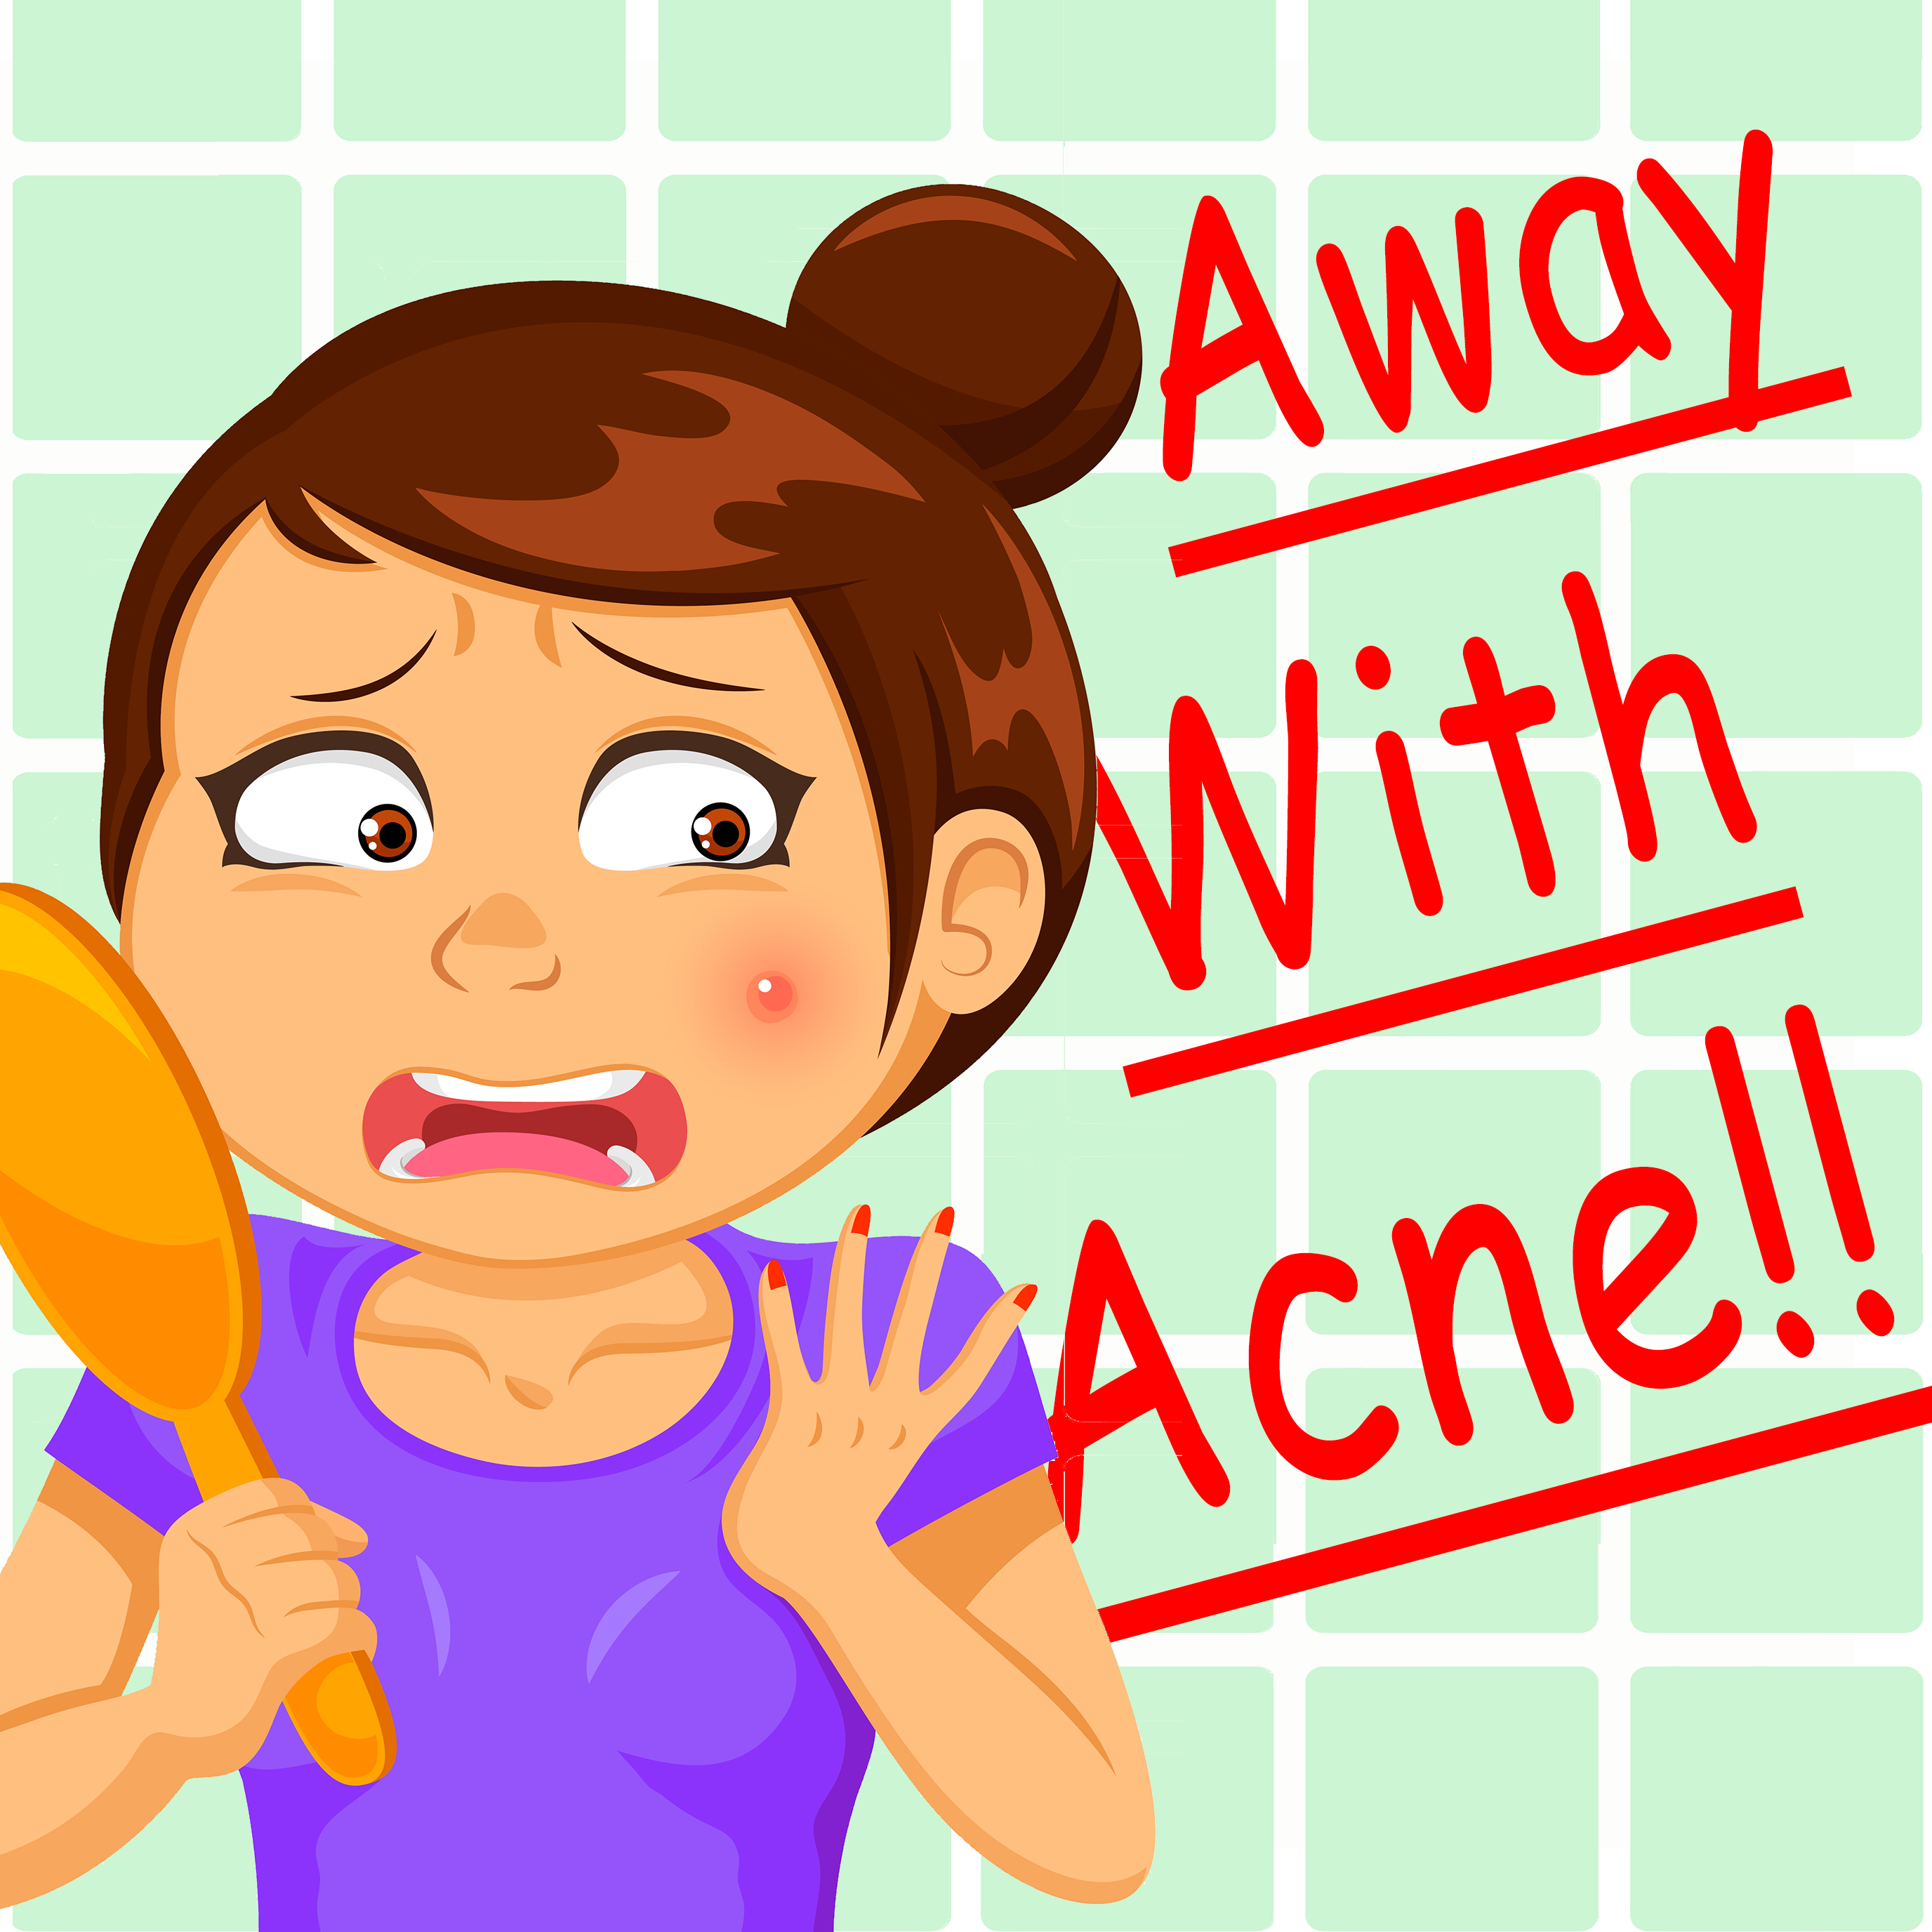 Away With Acne